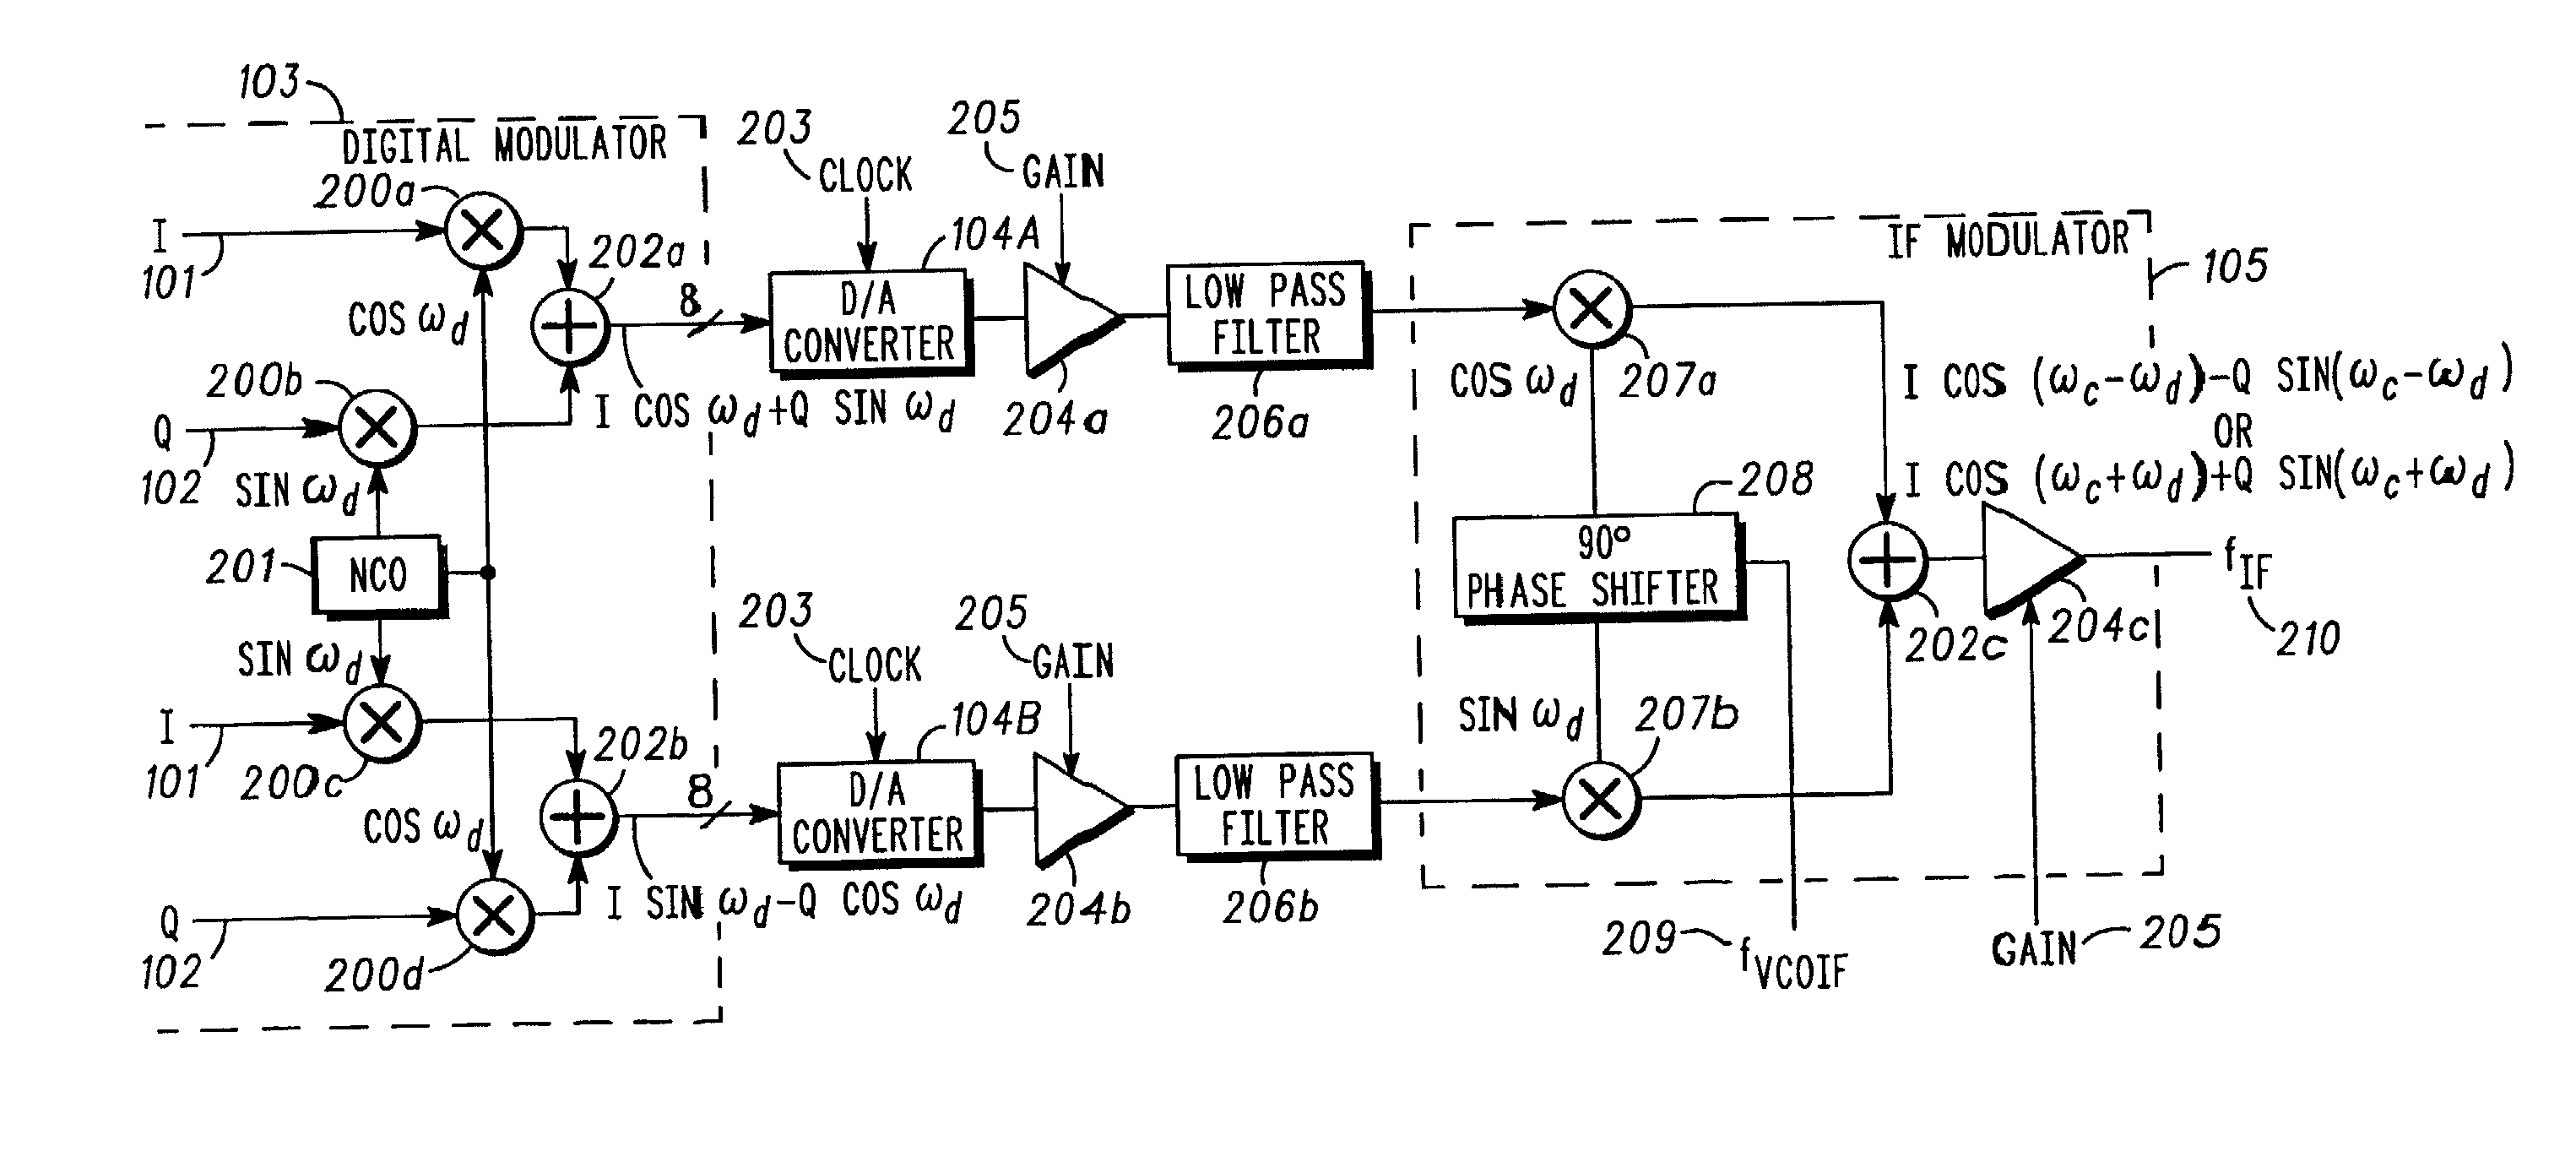 Modulation system for modulating data onto a carrier signal with offsets to compensate for doppler effect and allow a frequency synthesizing system to make steps equal to channel bandwidth